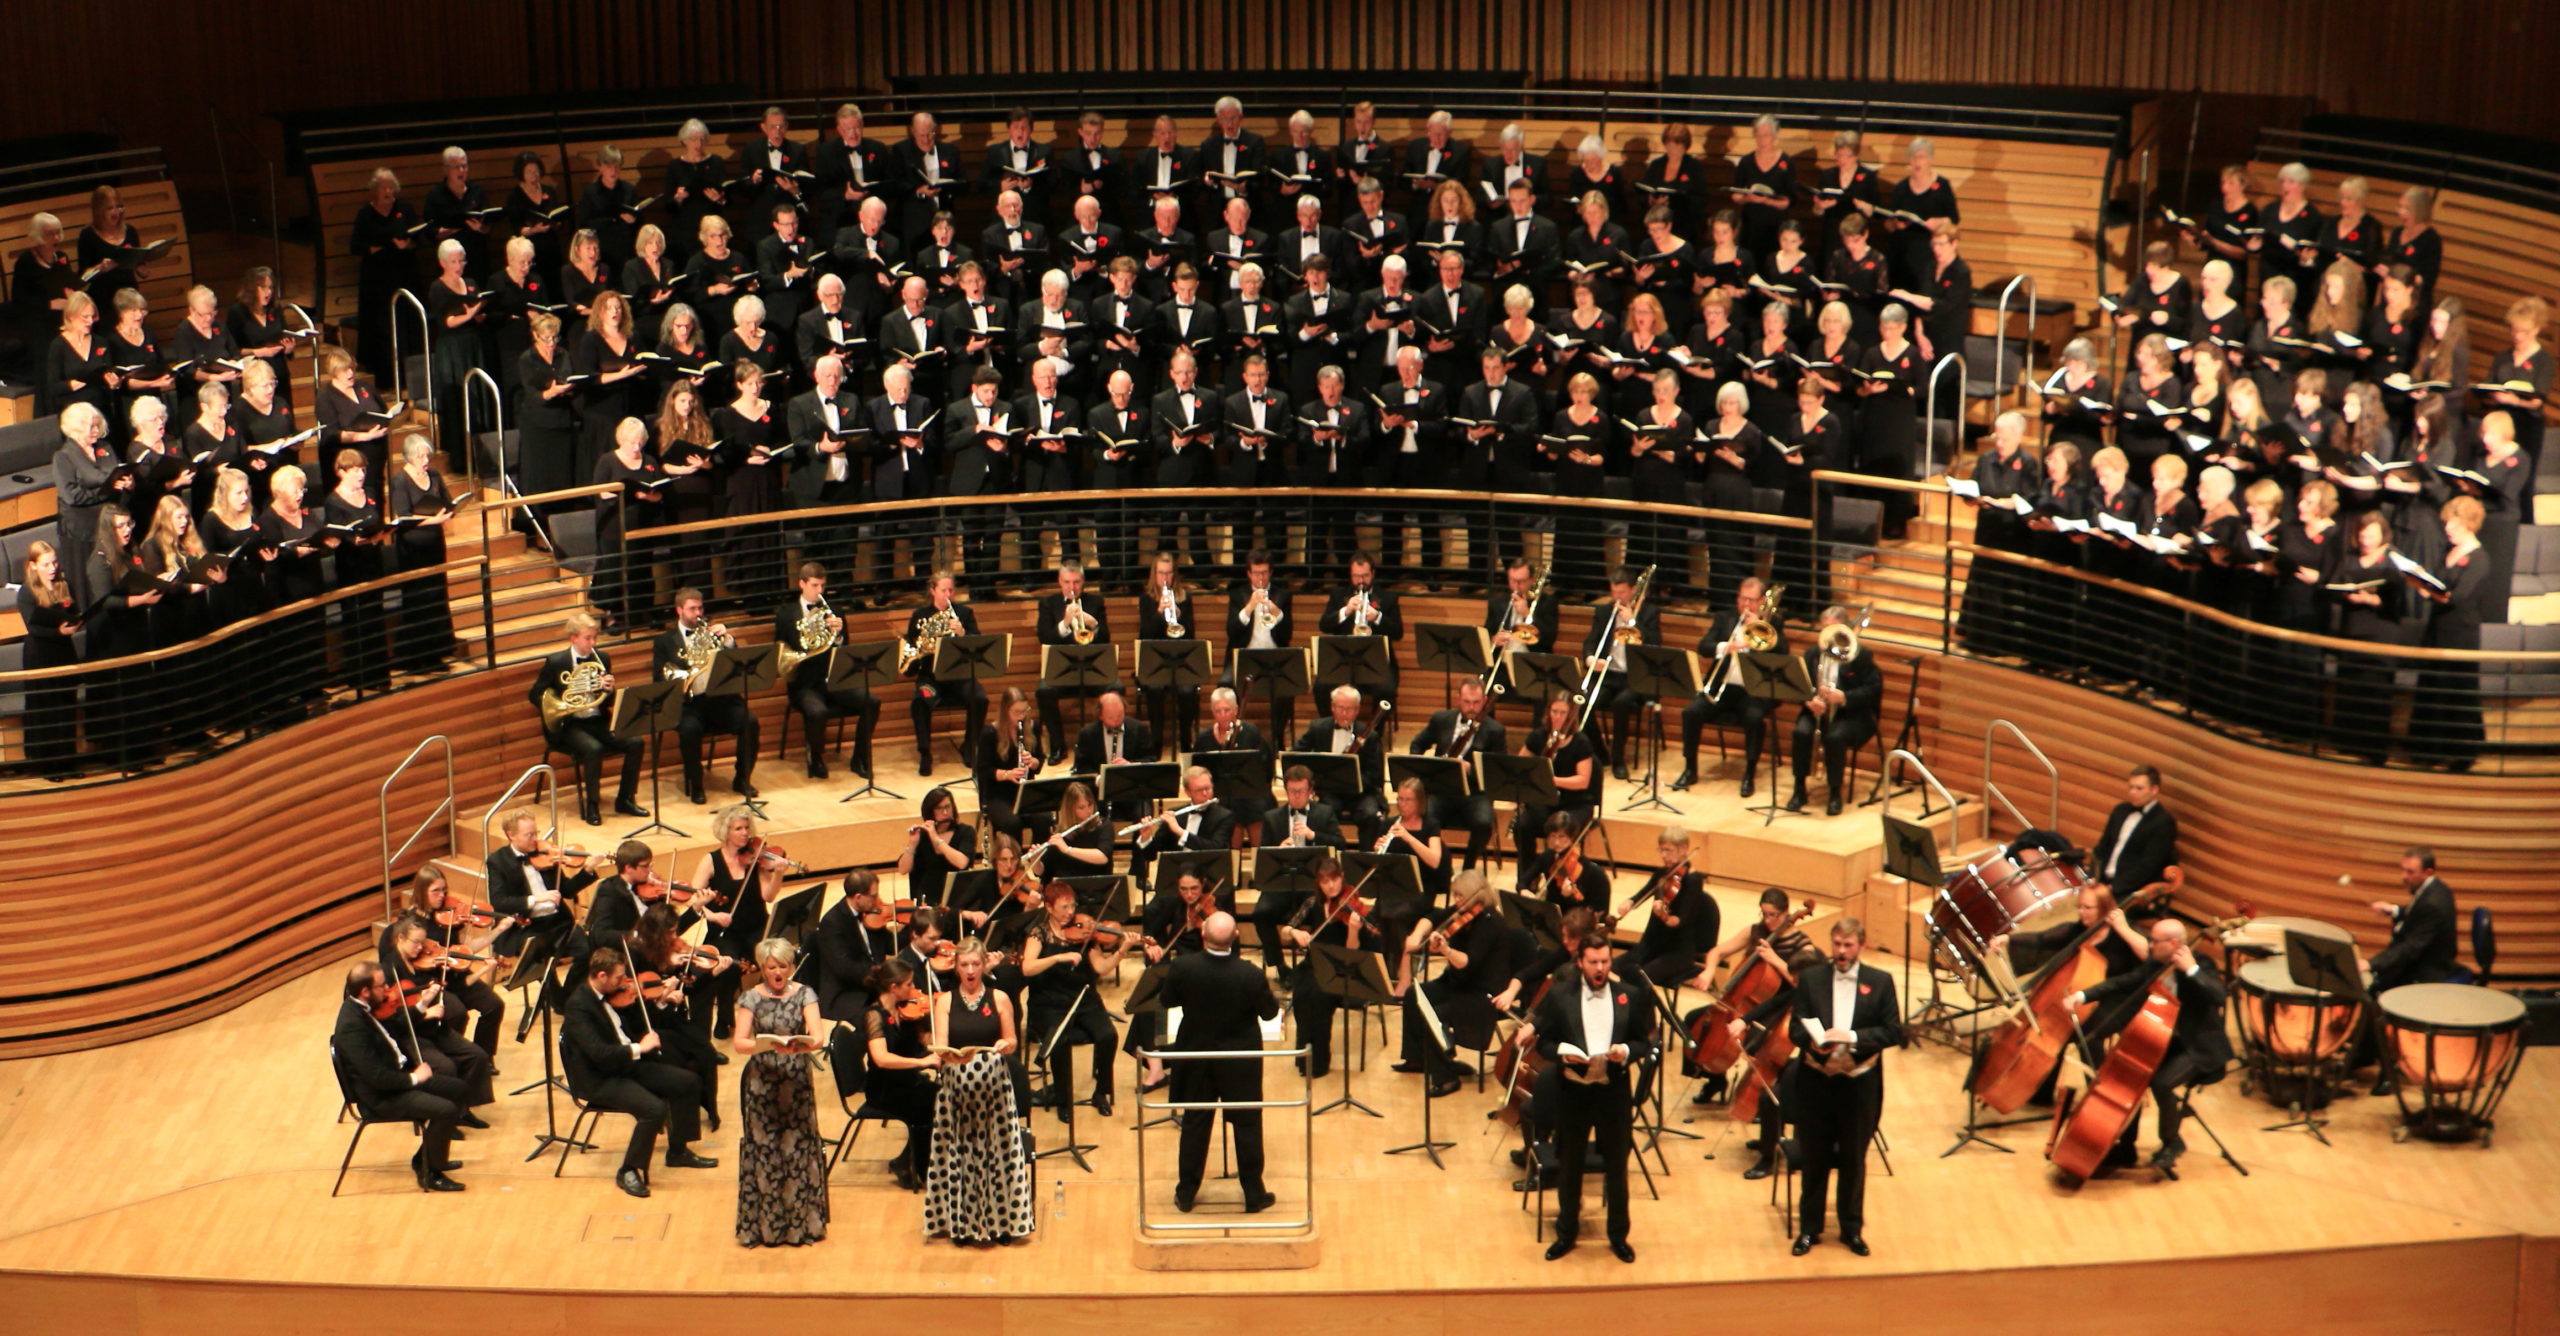 Cleveland Philharmonic Choir, which will perform The Dream of Gerontius at Gateshead